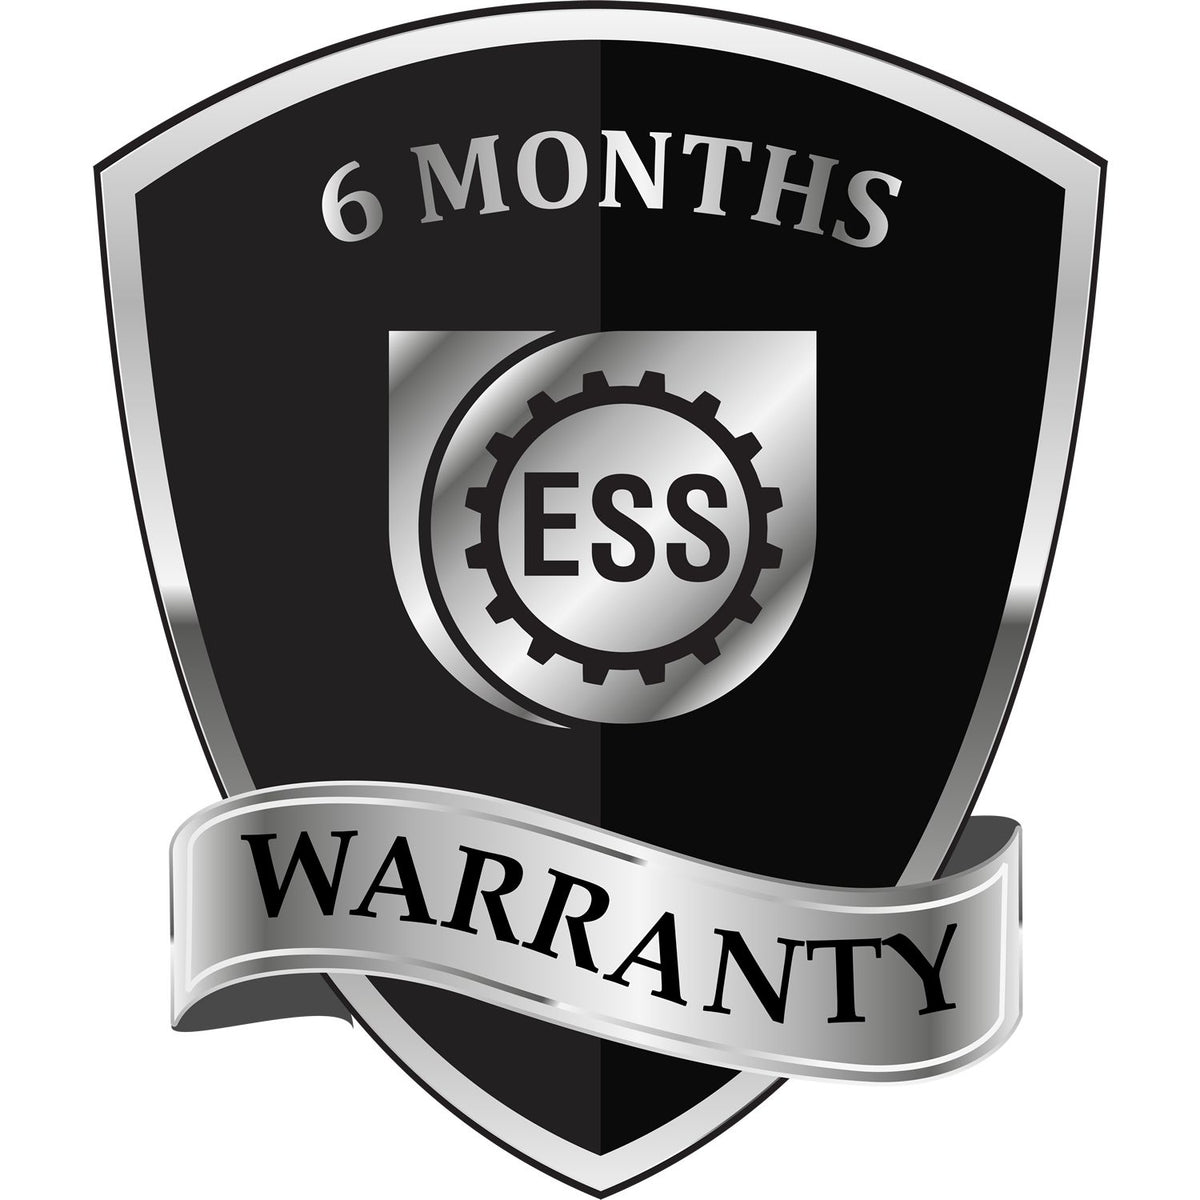 A badge or emblem showing a warranty icon for the PSI Florida Notary Stamp